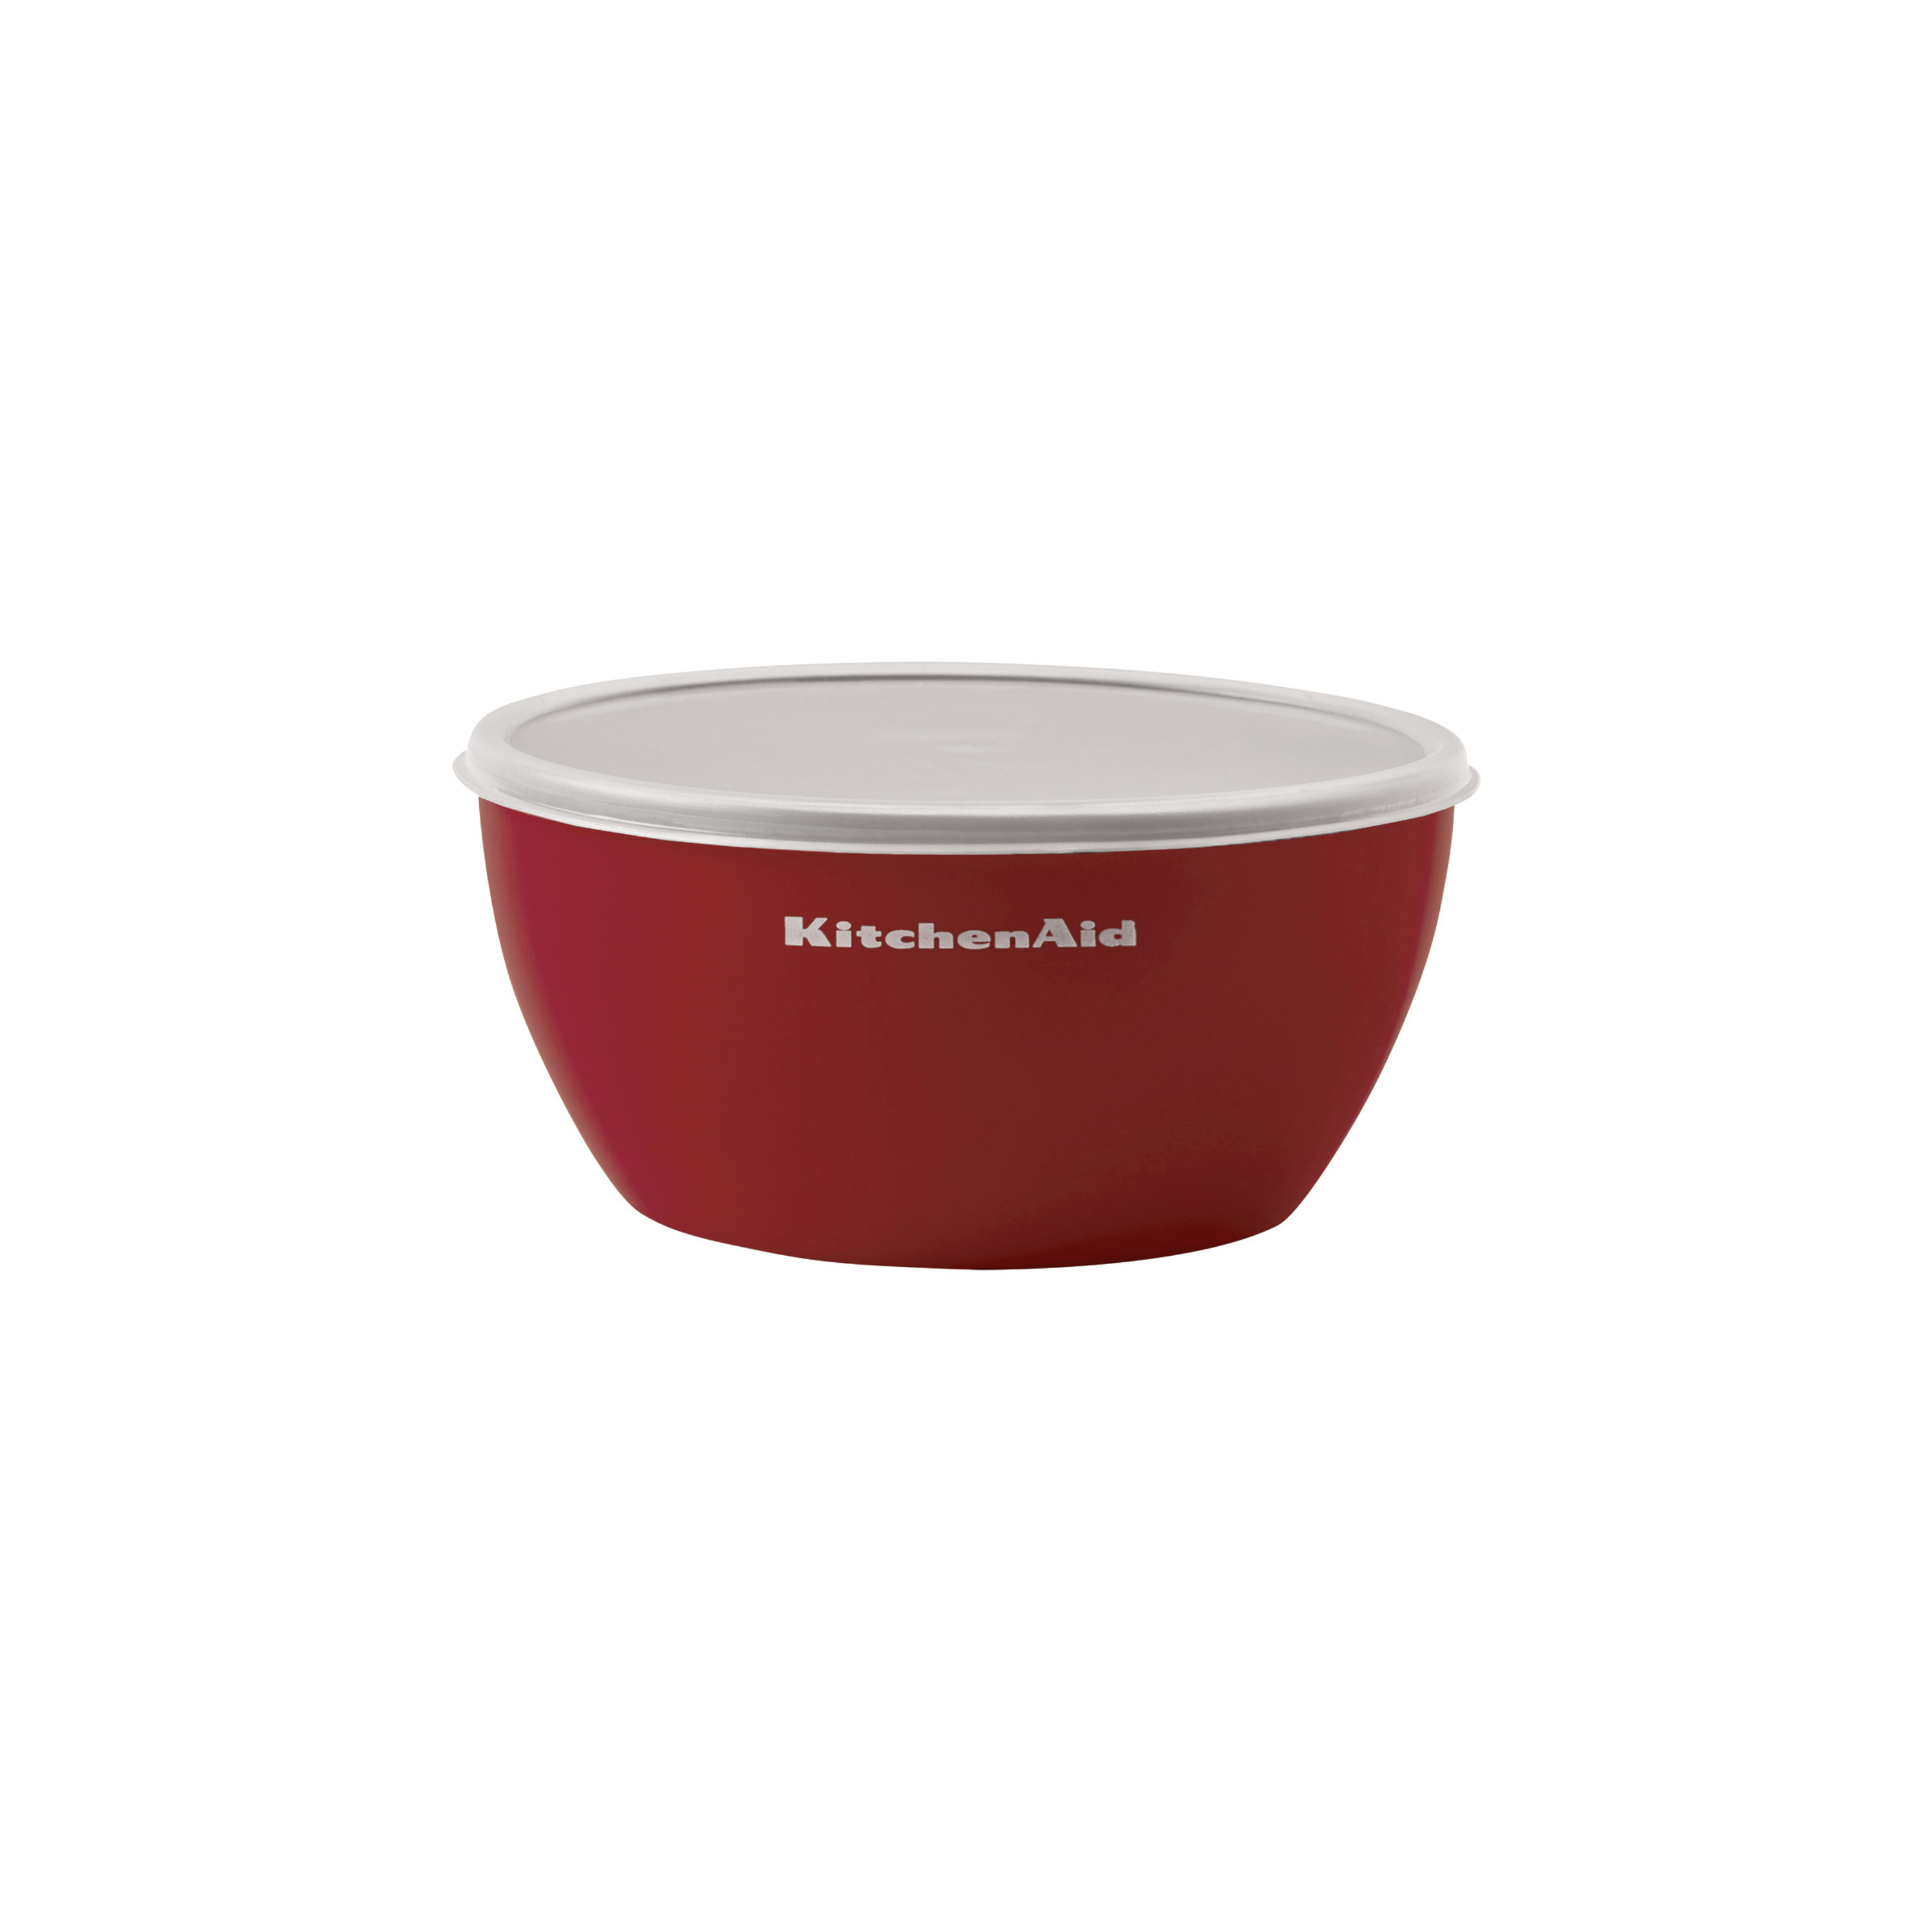 Kitchenaid 4-piece Prep Bowl Set with Lids, Assorted Sizes and Colors: Red, Grey, White - image 3 of 15